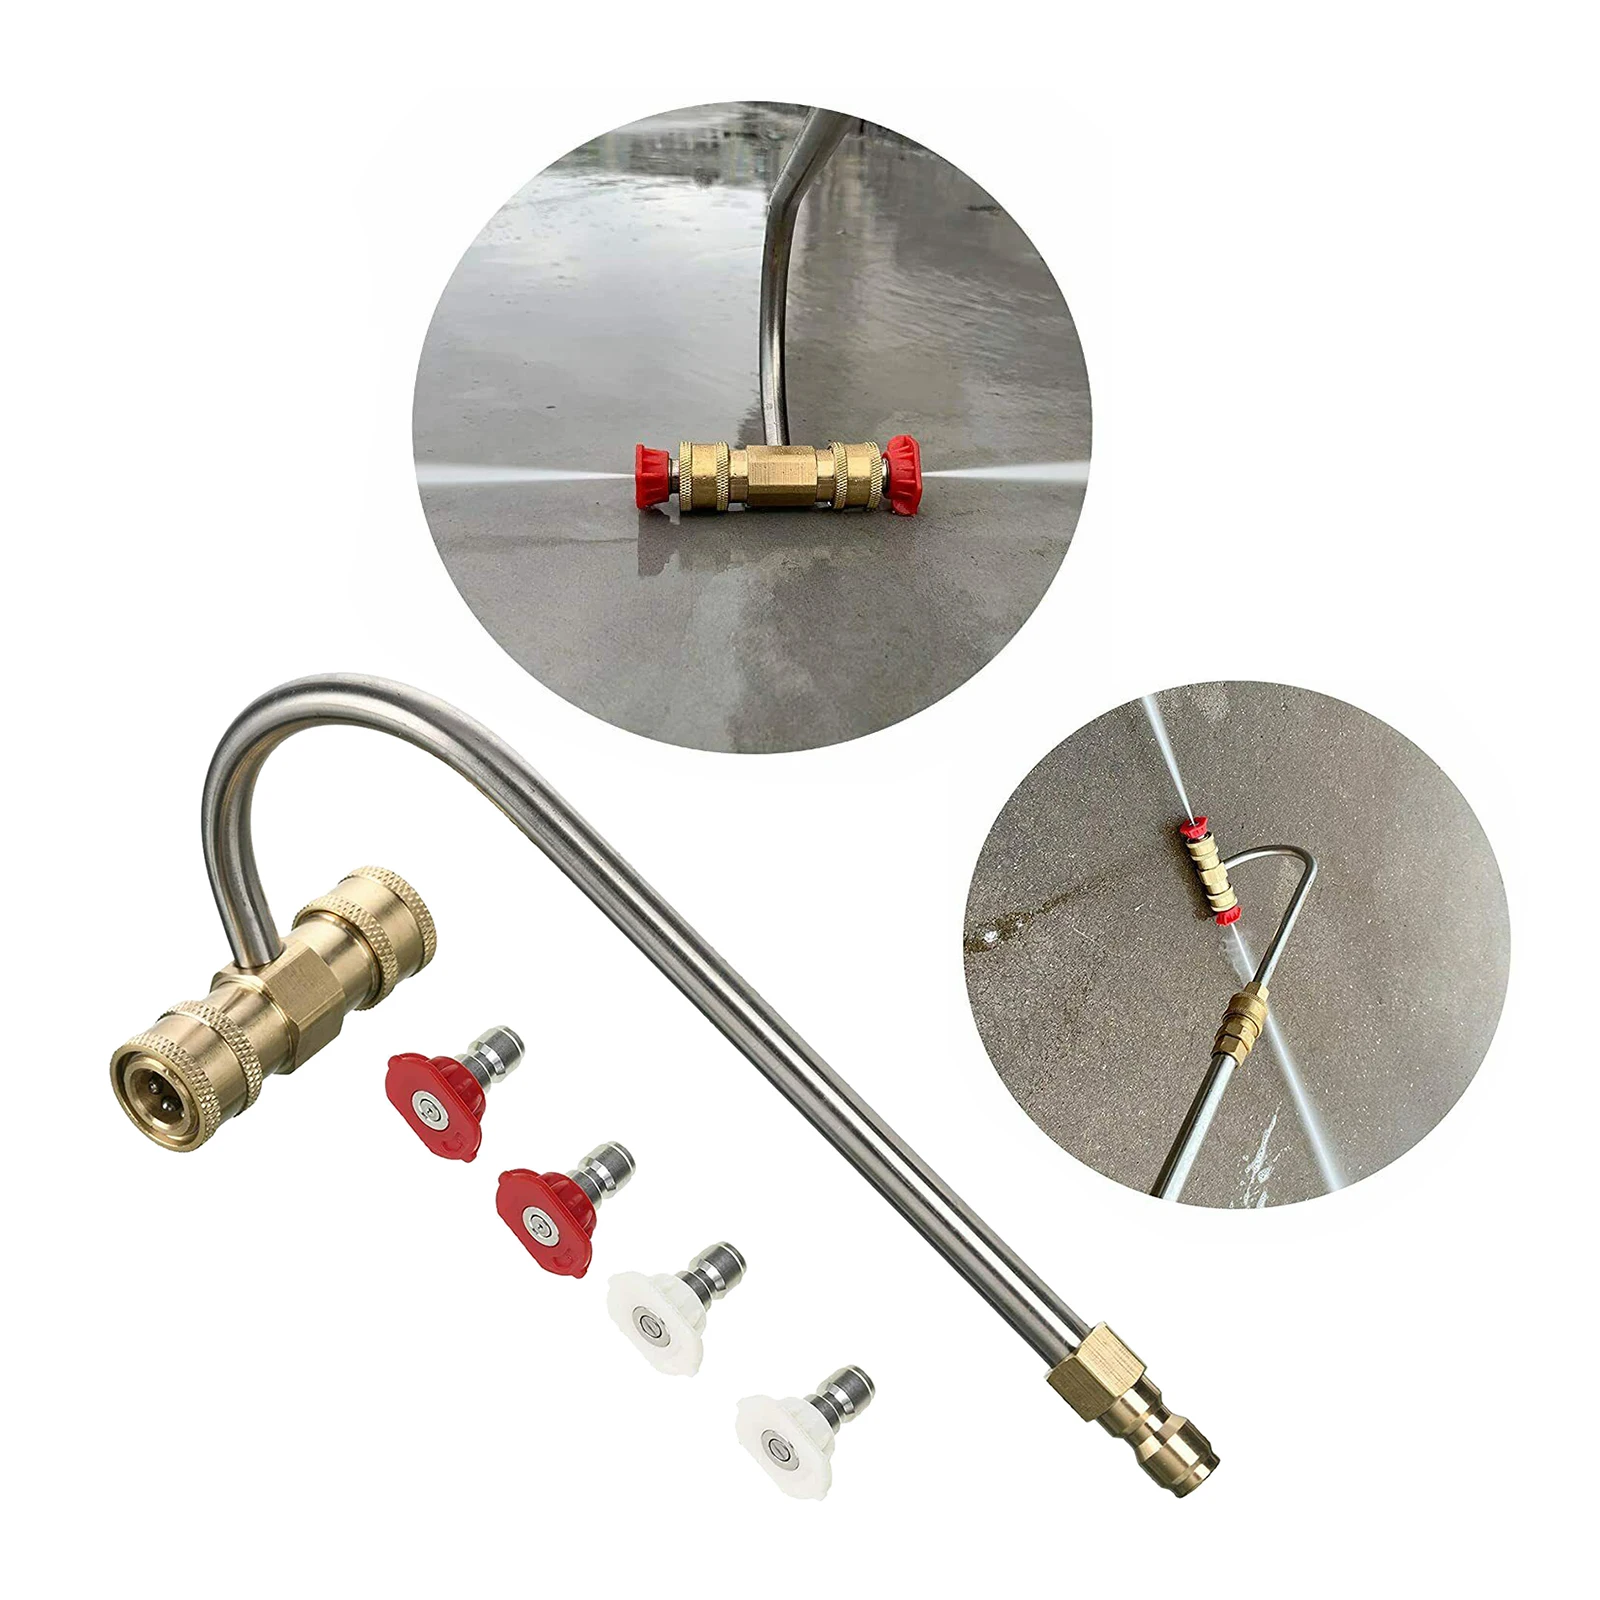 Gutter Cleaning Blower Attachment Kit Debris Dry Leaves Cleaner Parts